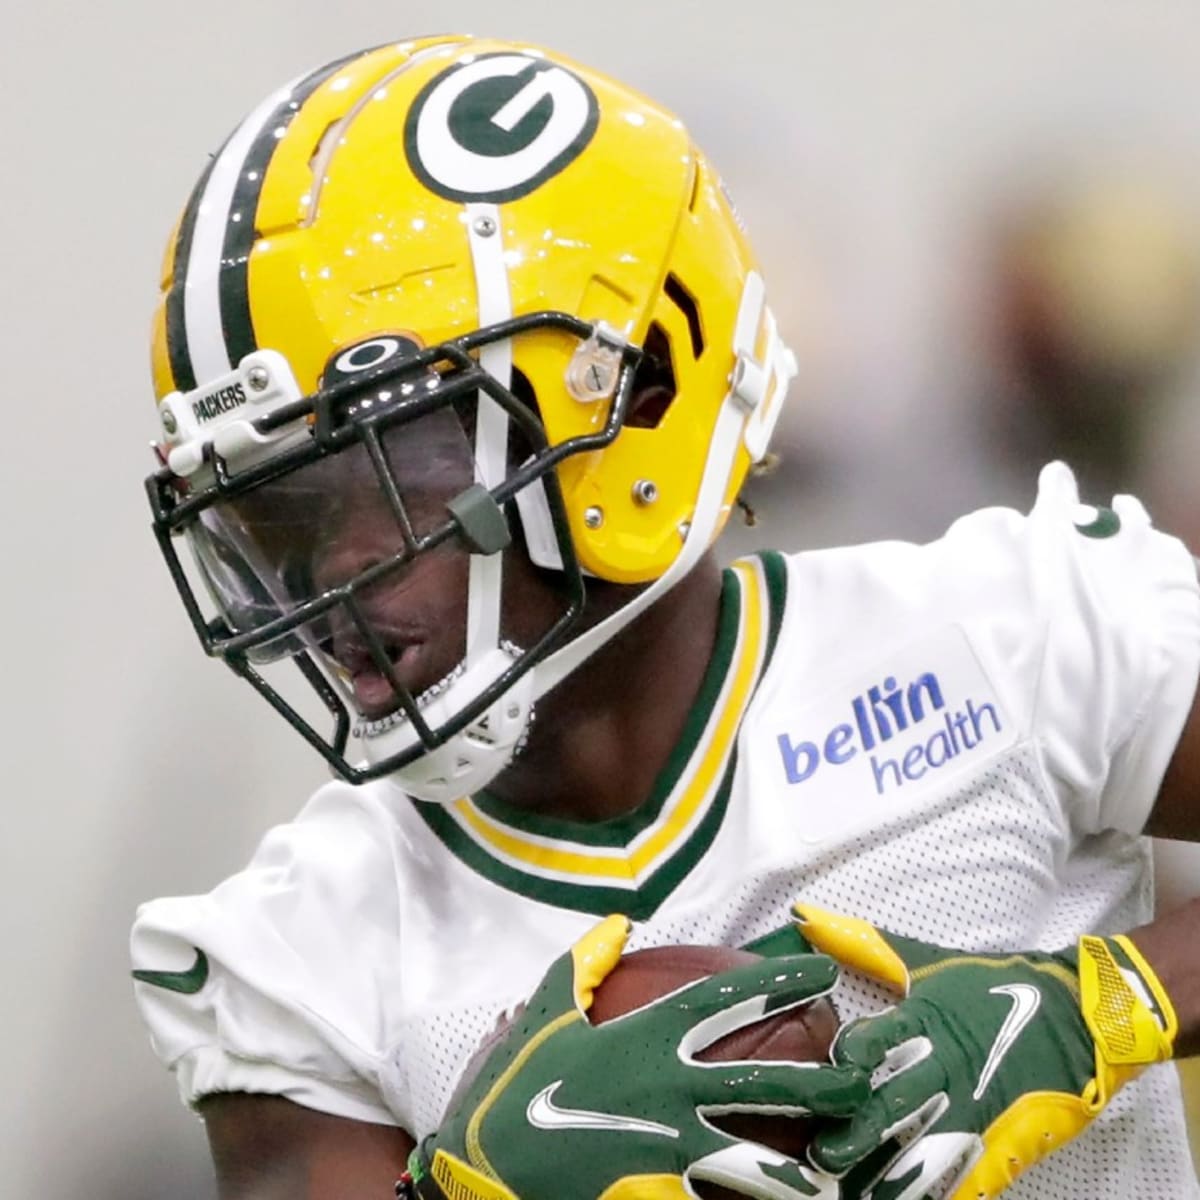 Packers' Love tosses TD to rookie Reed in suspended game vs. Patriots  Wisconsin News - Bally Sports